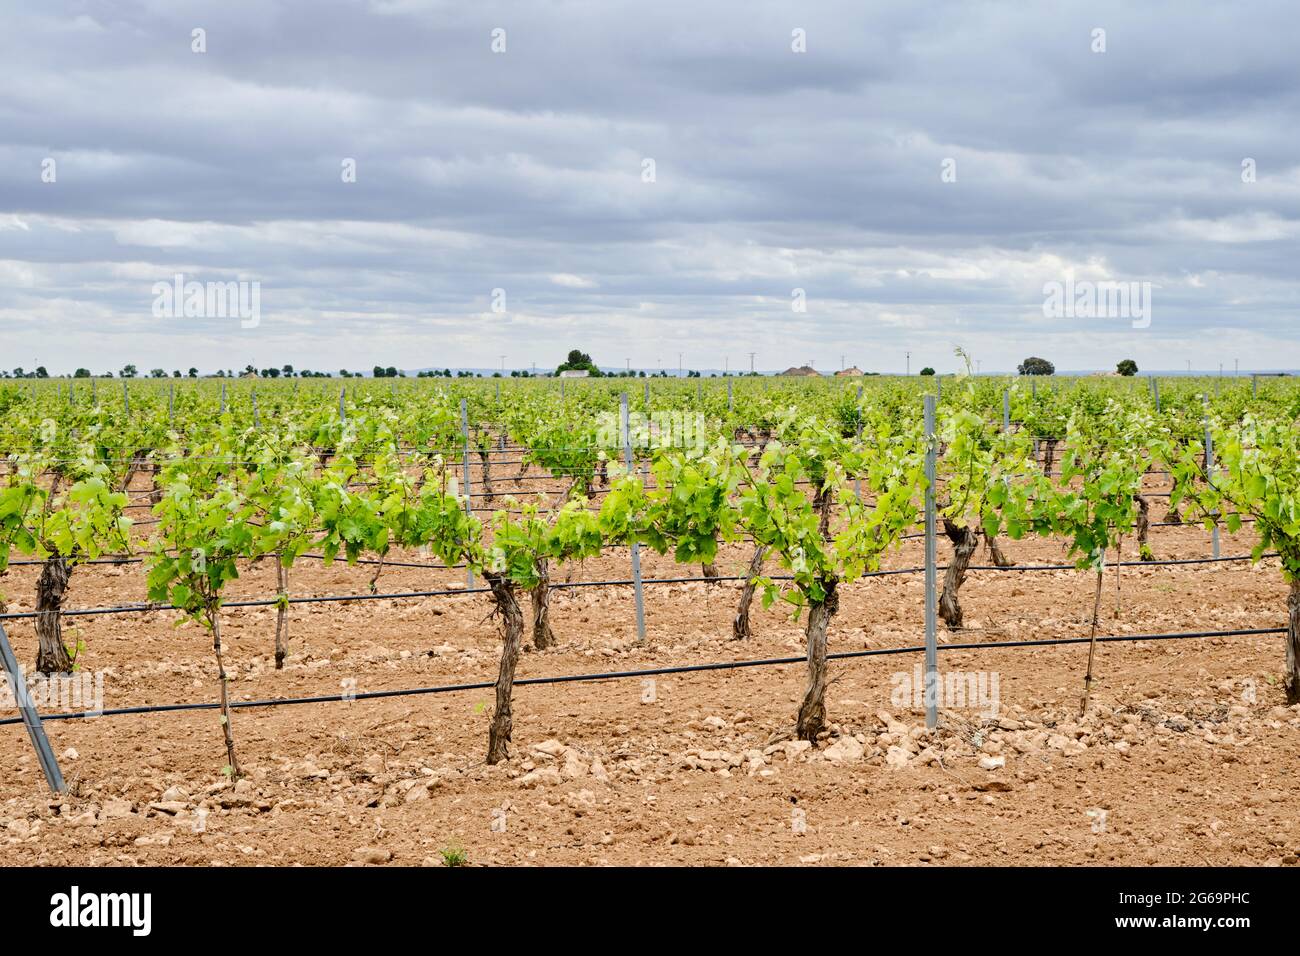 Winemaking vineyard in La Mancha with drip irrigation system watering the plants roots Stock Photo